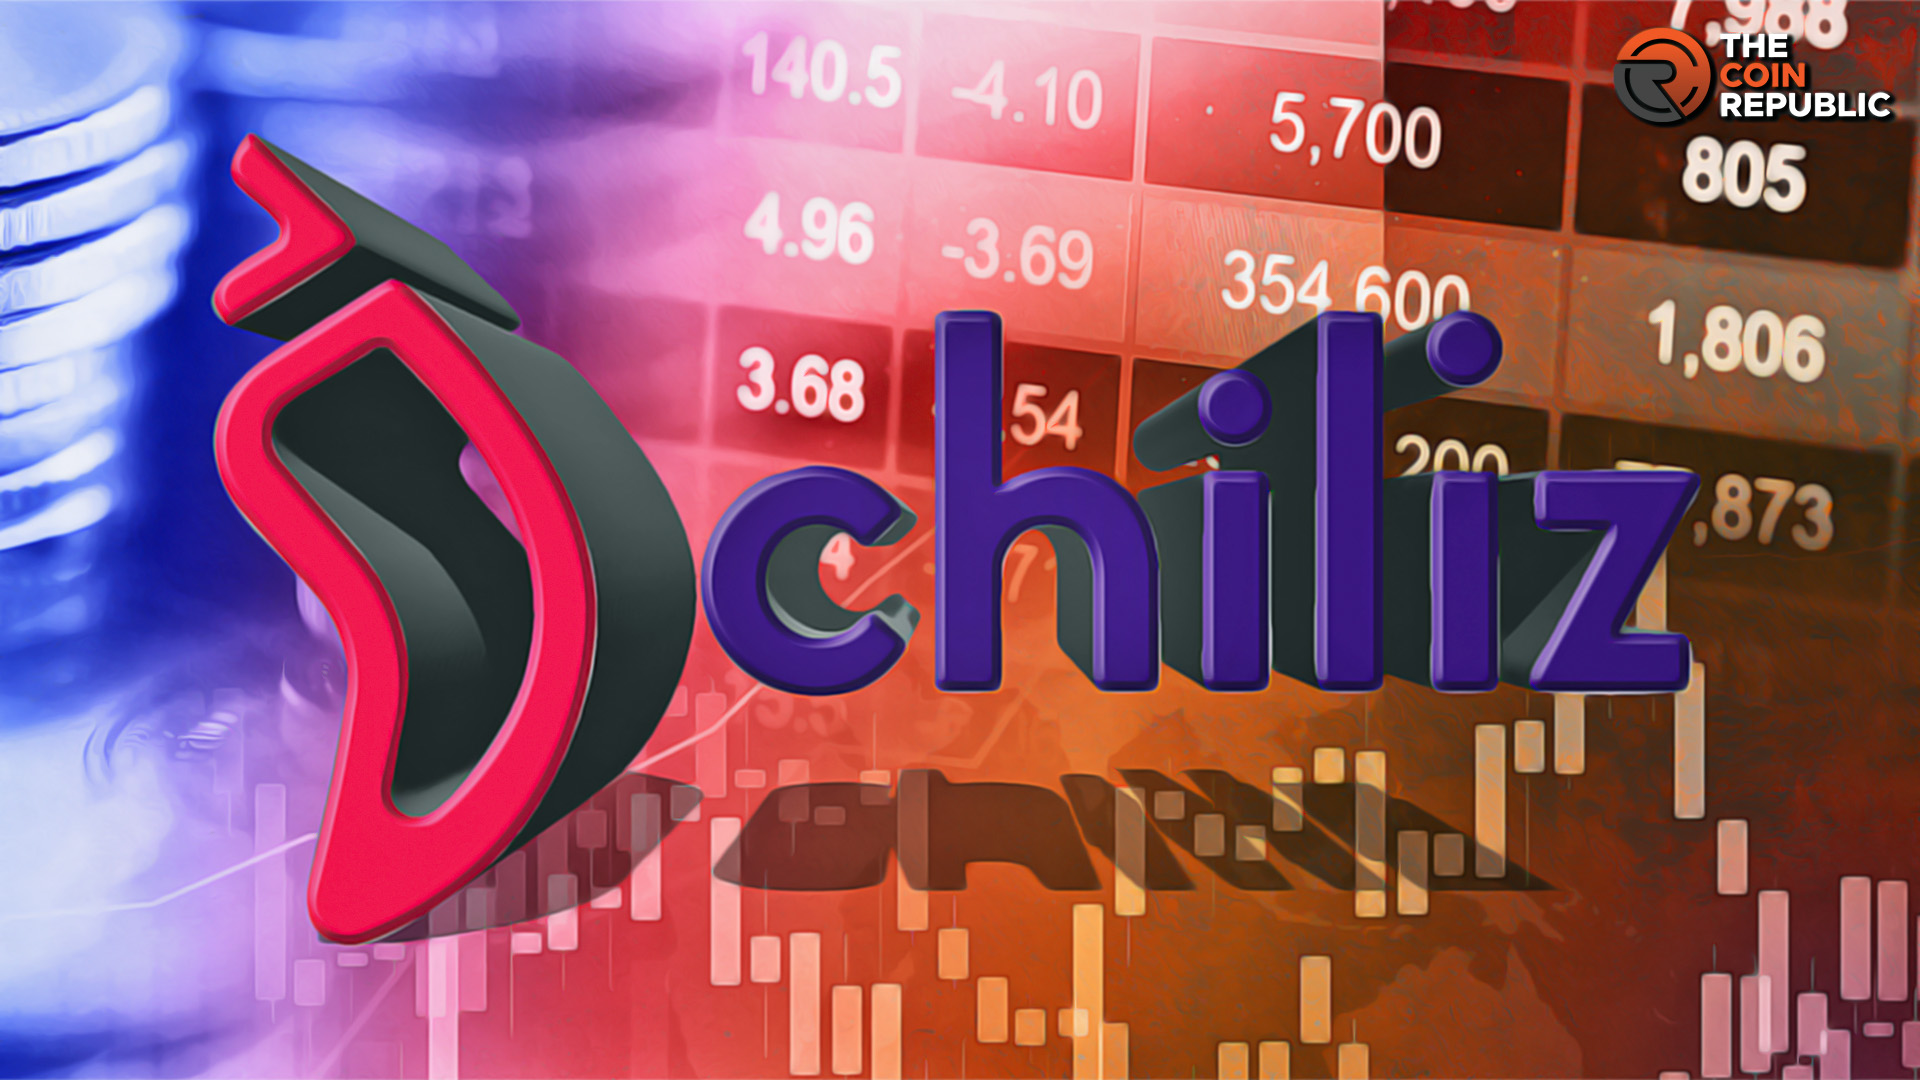 Chiliz Price Near 6 Months High; Will It Breakout or Reverse Down?